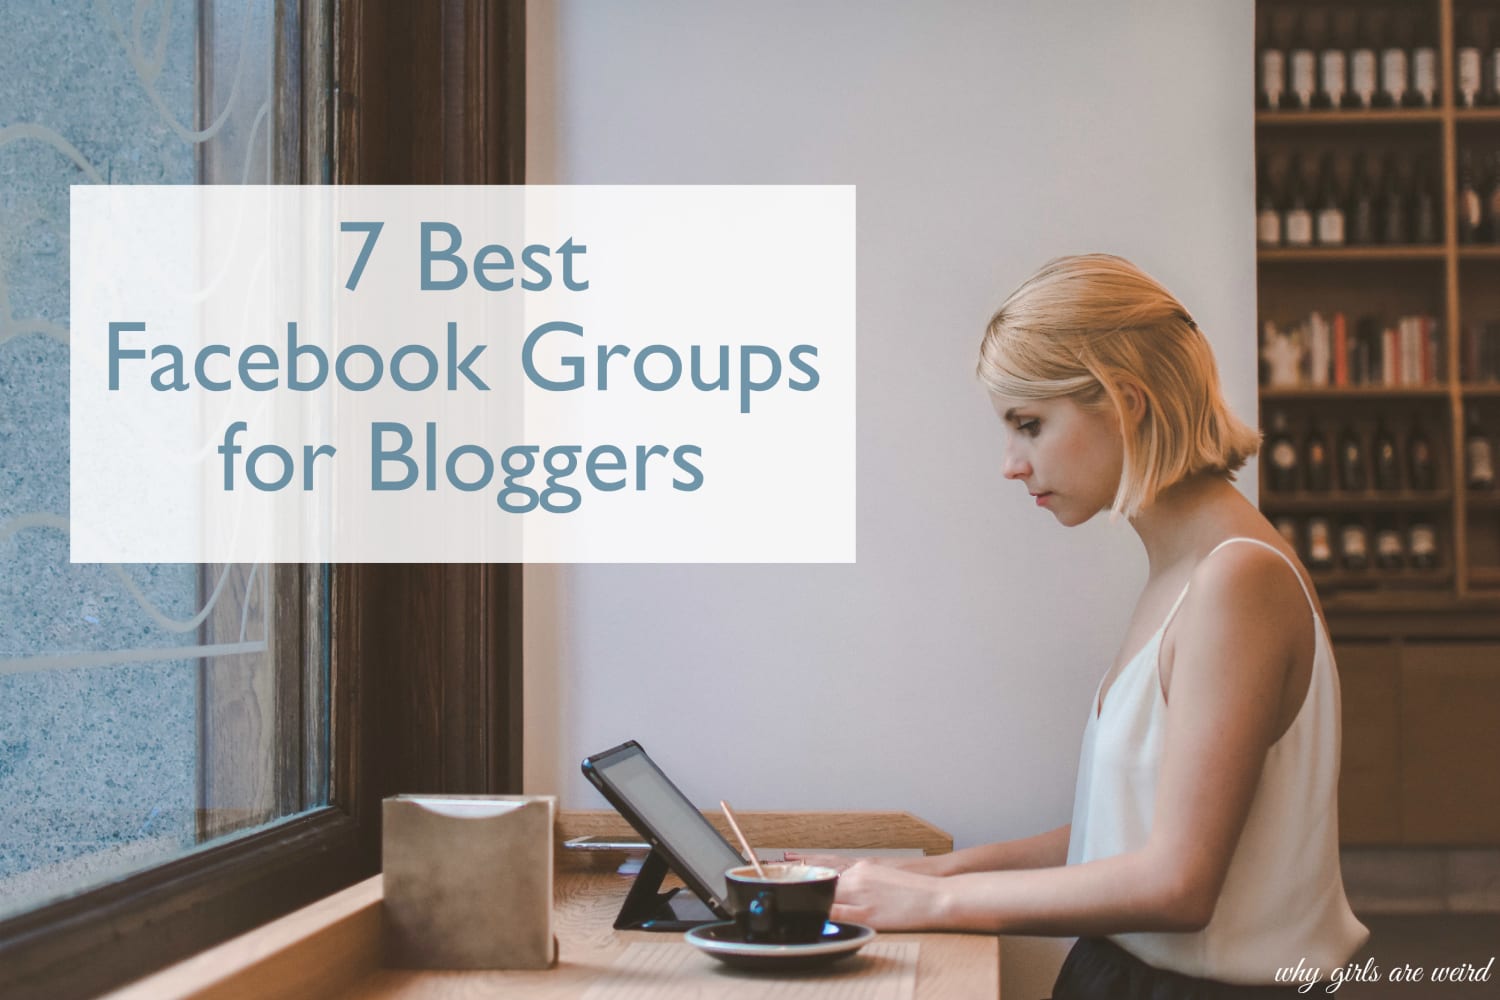 7 Best Facebook Groups for Bloggers